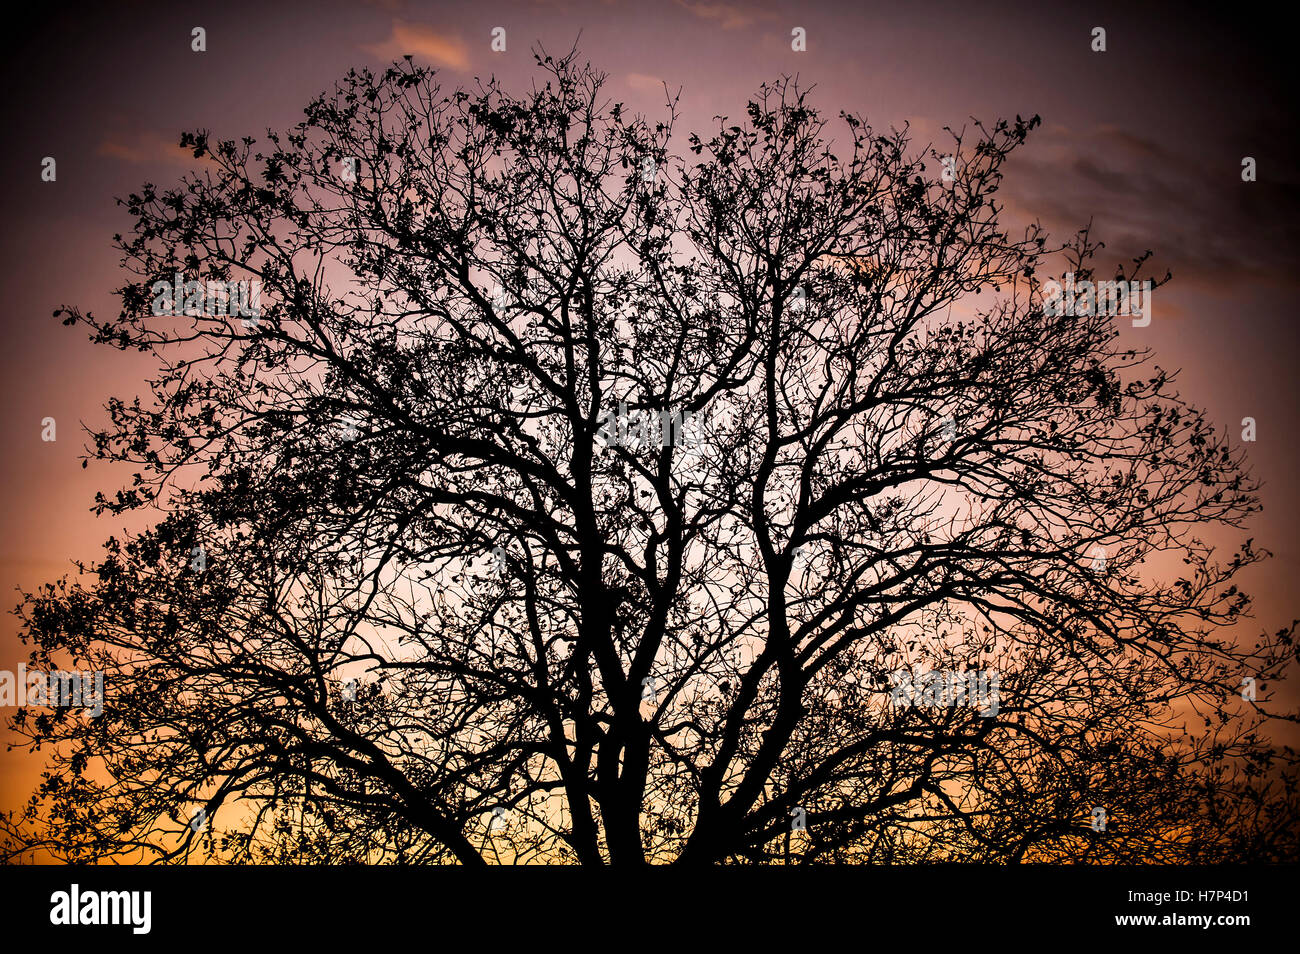 Tree silhouette in low light with vignette effect Stock Photo